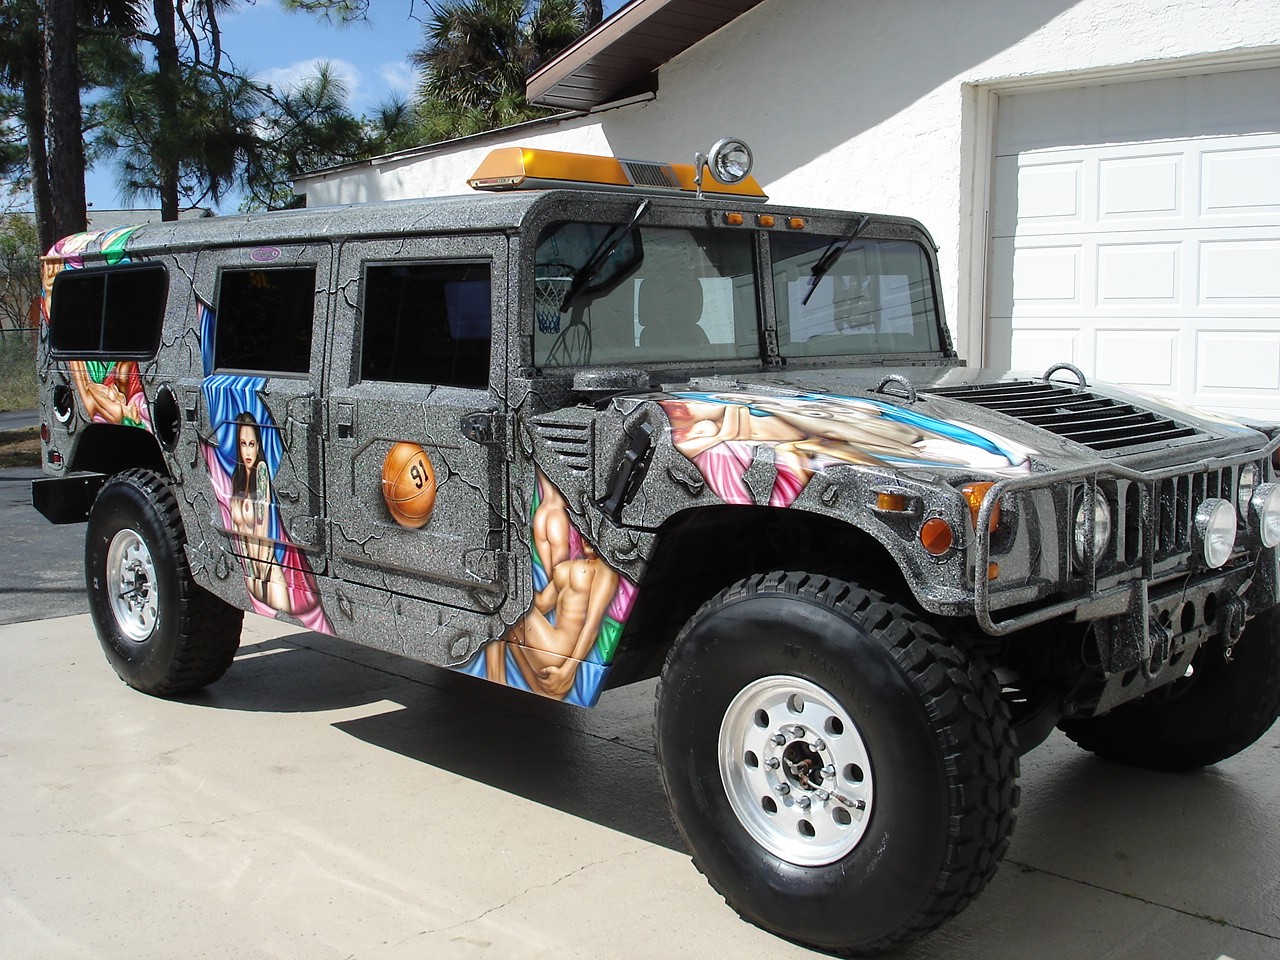 Dennis Rodman’s Hummer H1 Is Up For Sale, But Will Kim Jong-un Buy it? - autoevolution1280 x 960